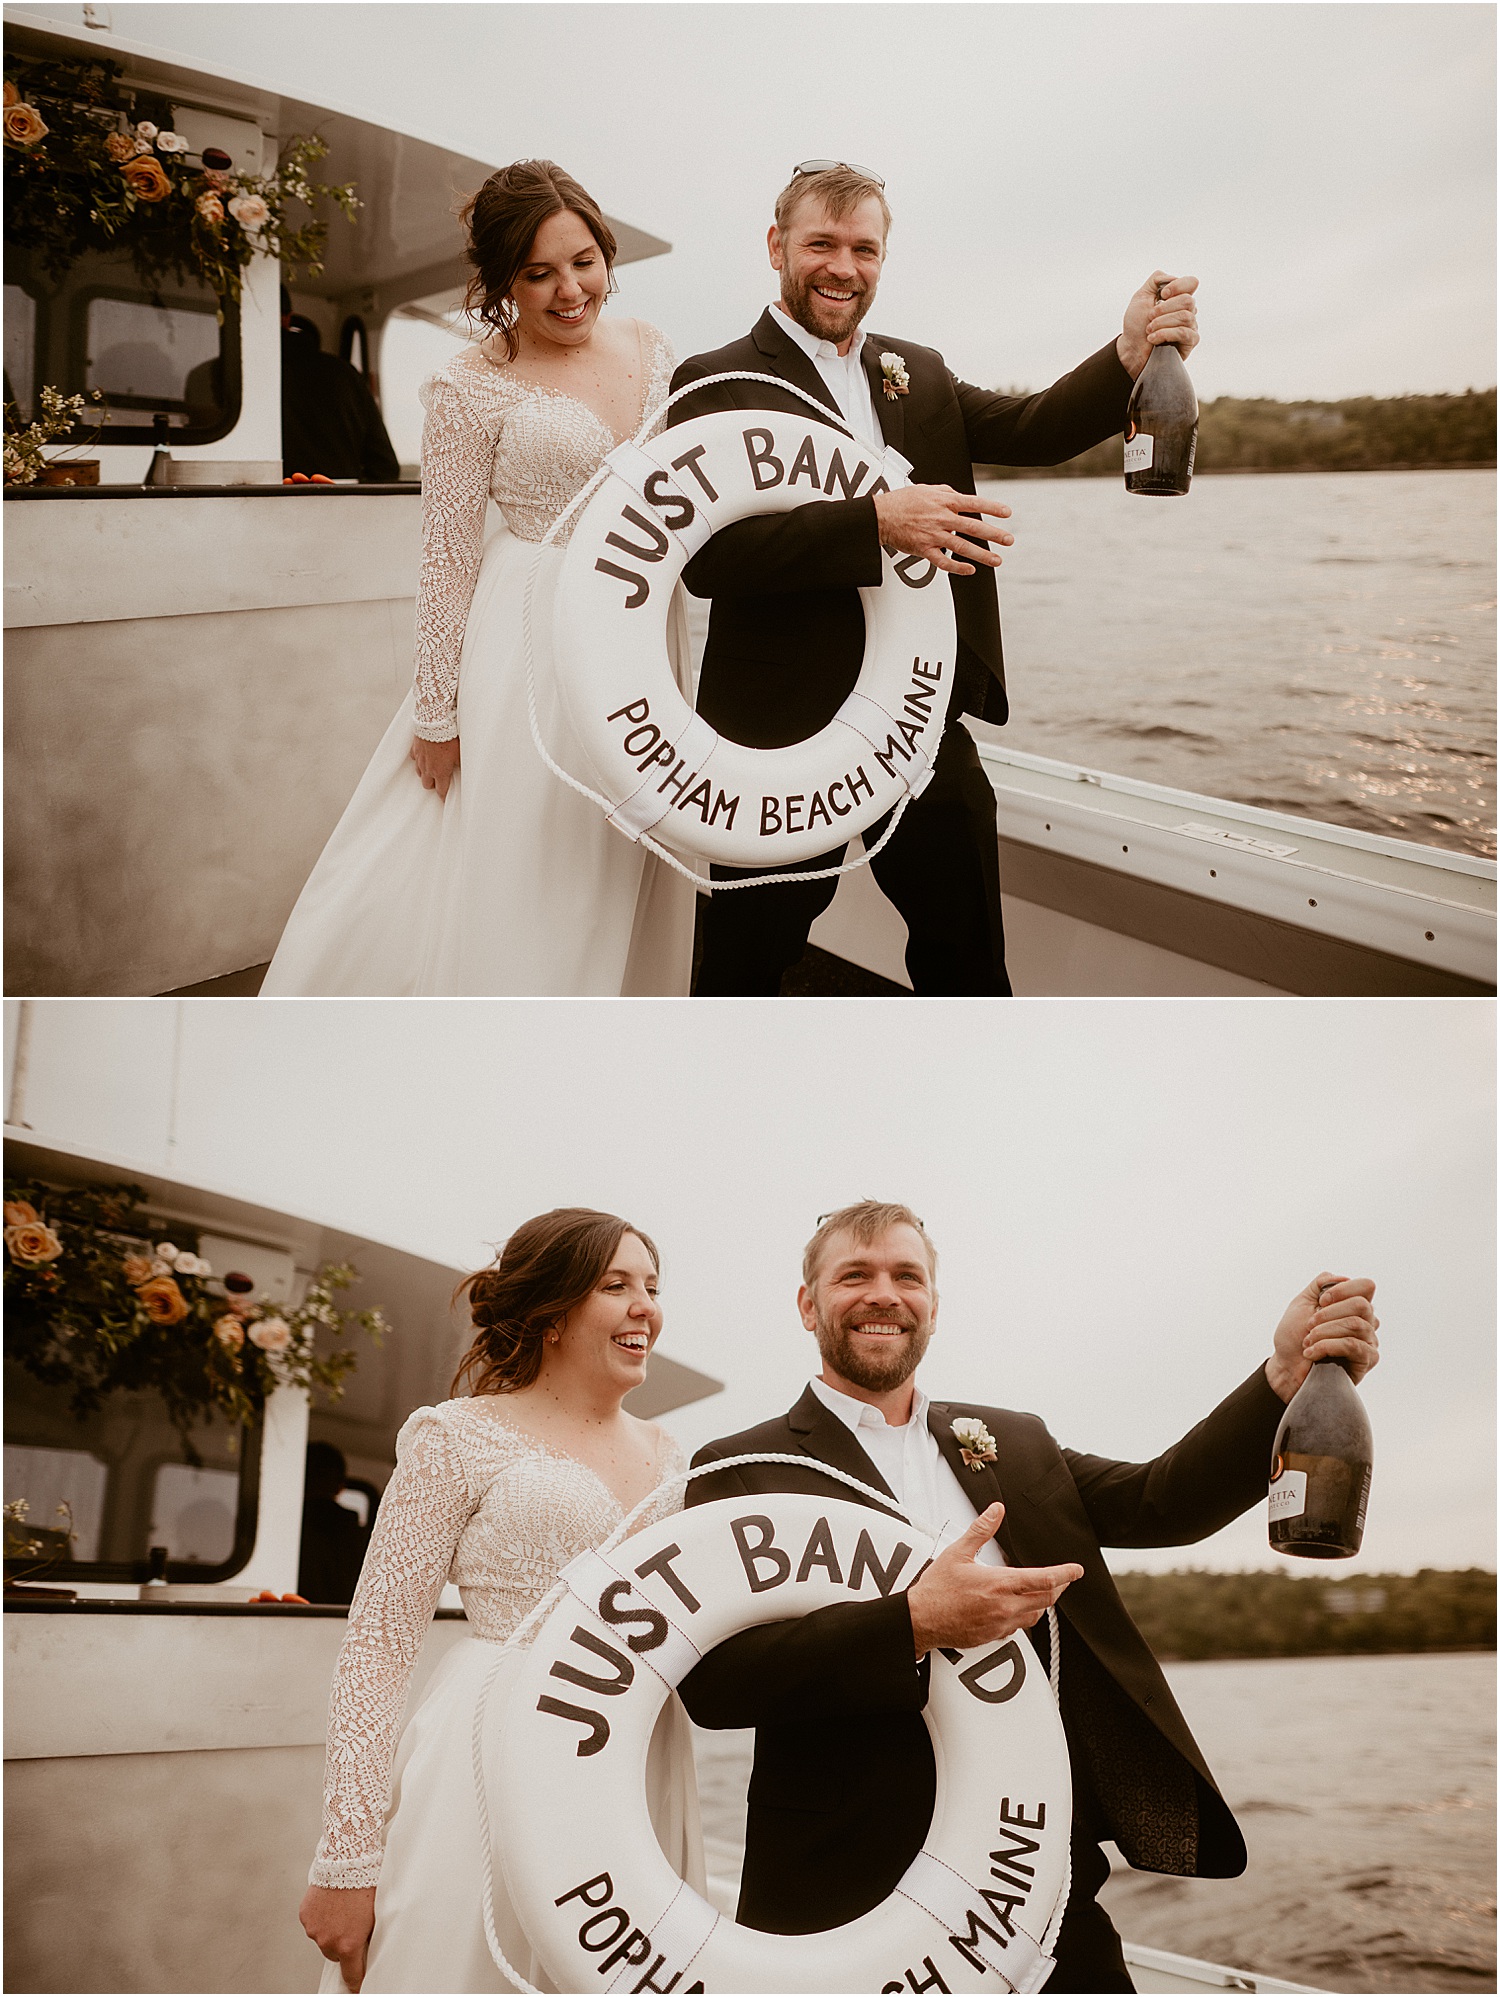 Happy couple celebrate their love on Just Banded Lobster Boat Elopement